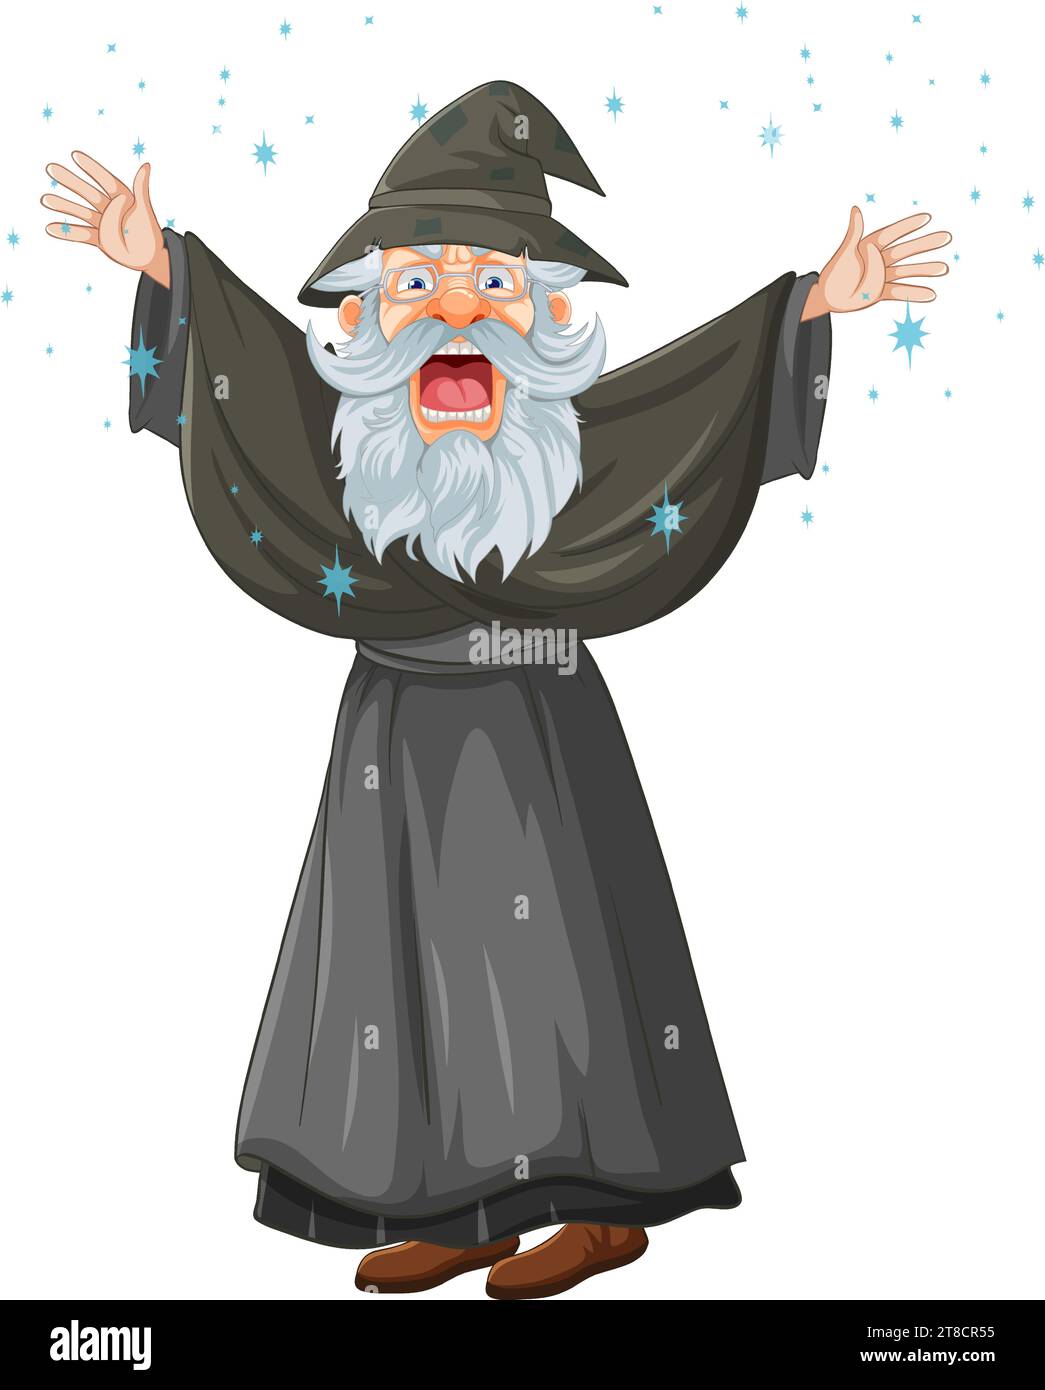 A spooky old man with a wizard's attire casting spells Stock Vector